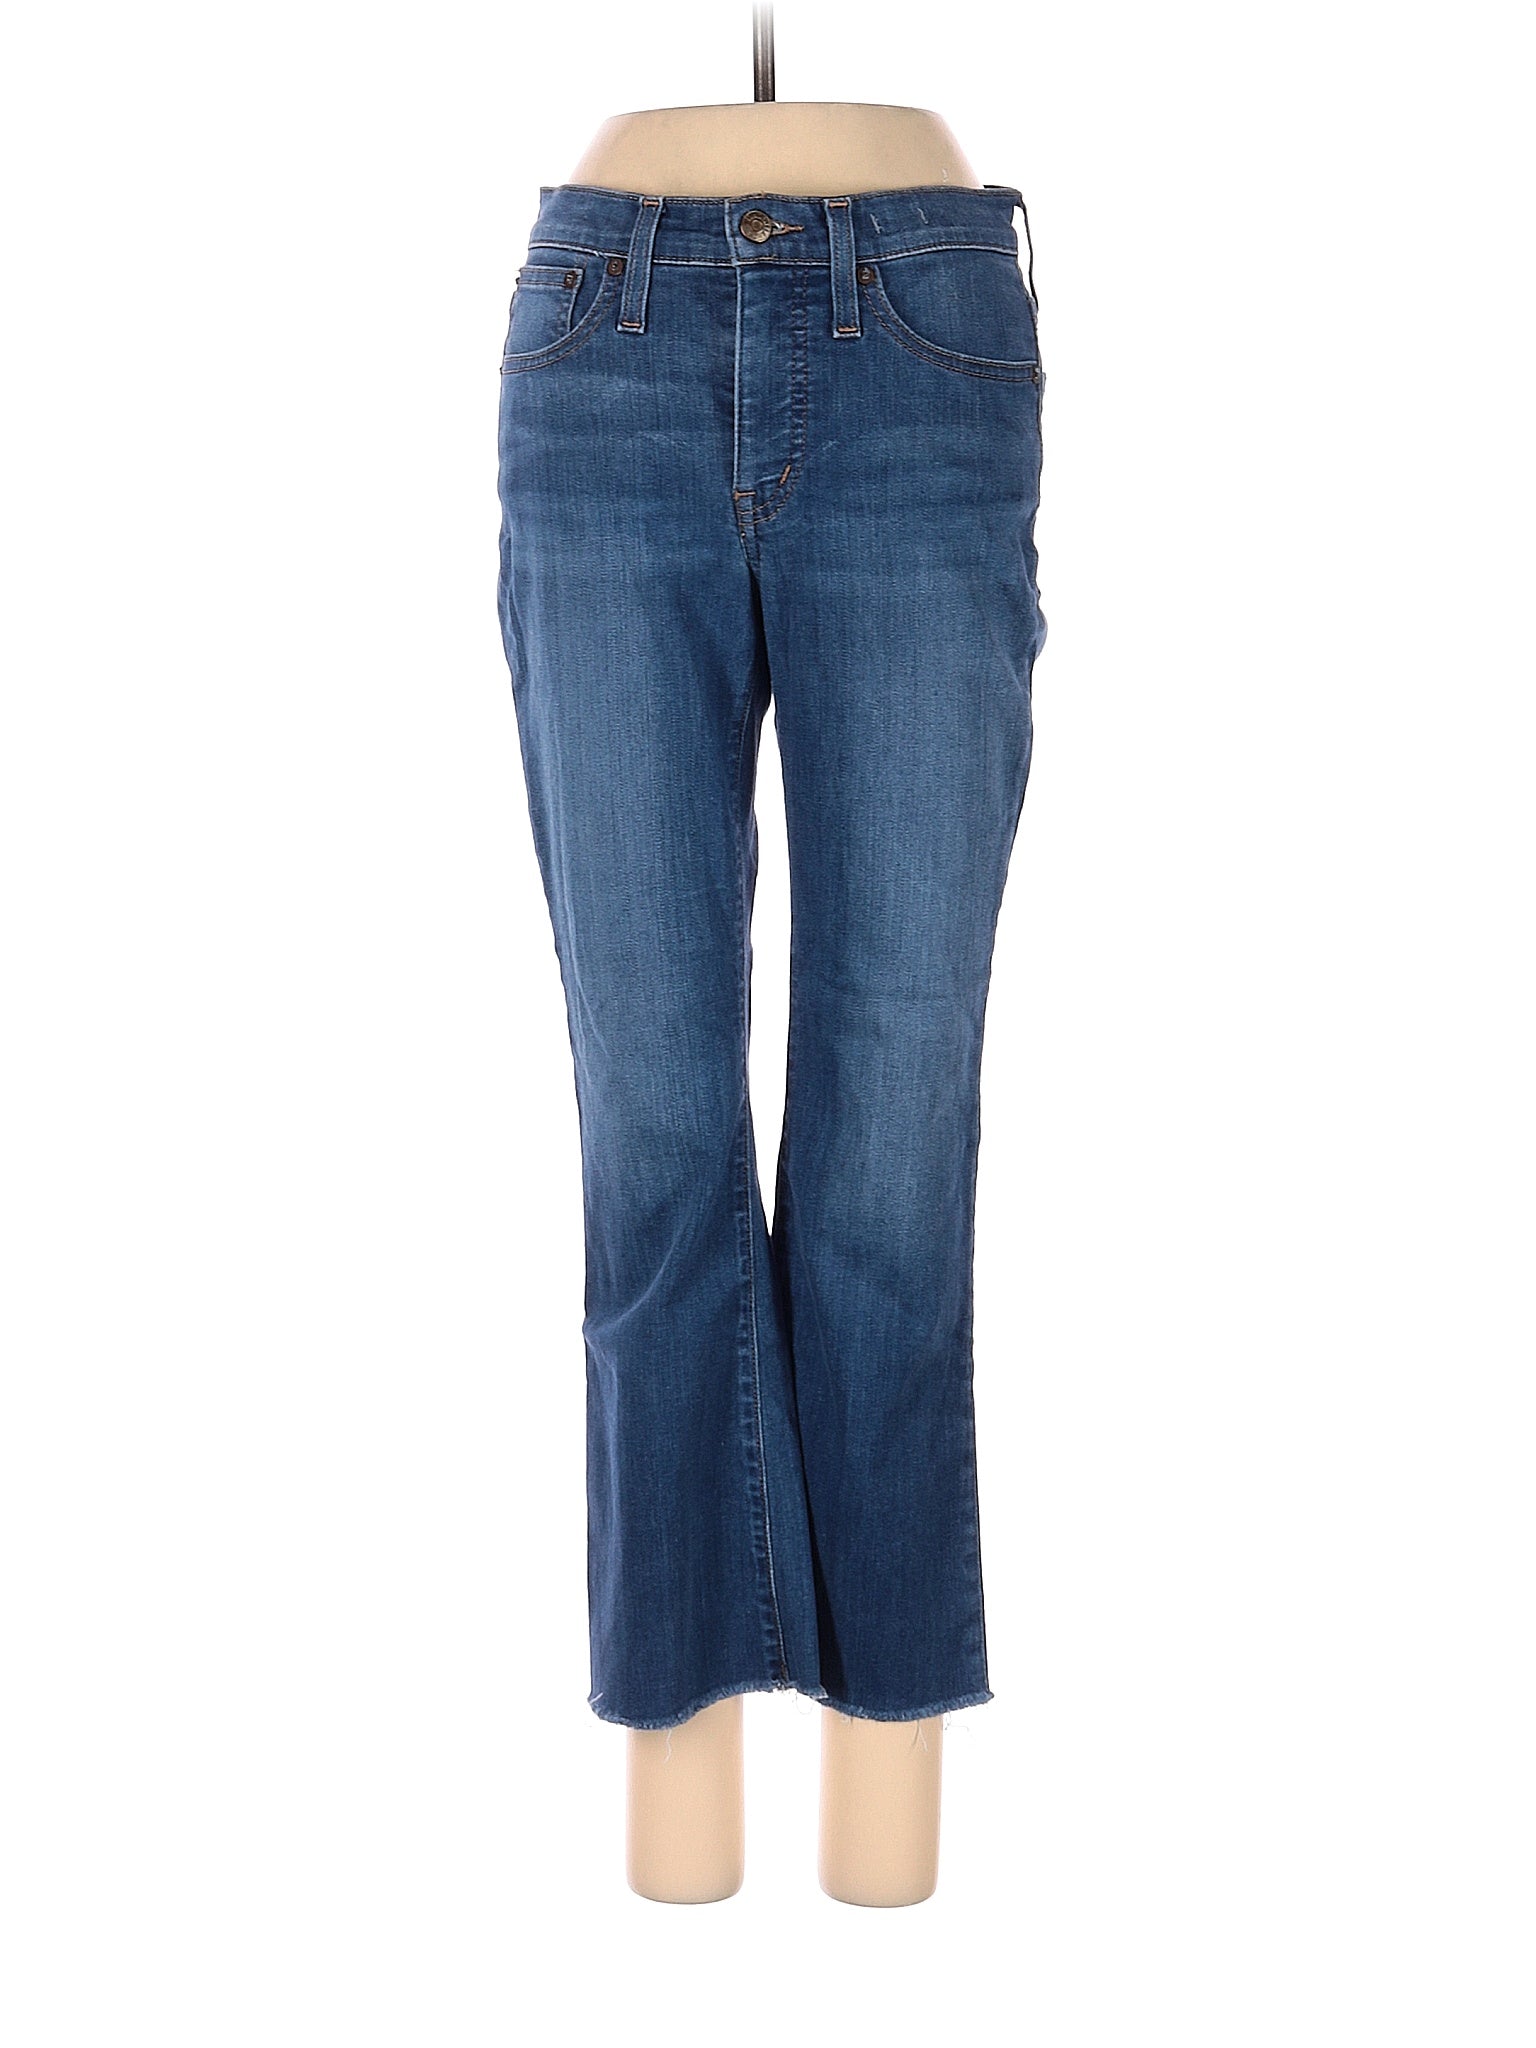 Mid-Rise Boyjeans Petite Cali Demi-Boot Jeans In Marco Wash in Dark Wash waist size - 25 P